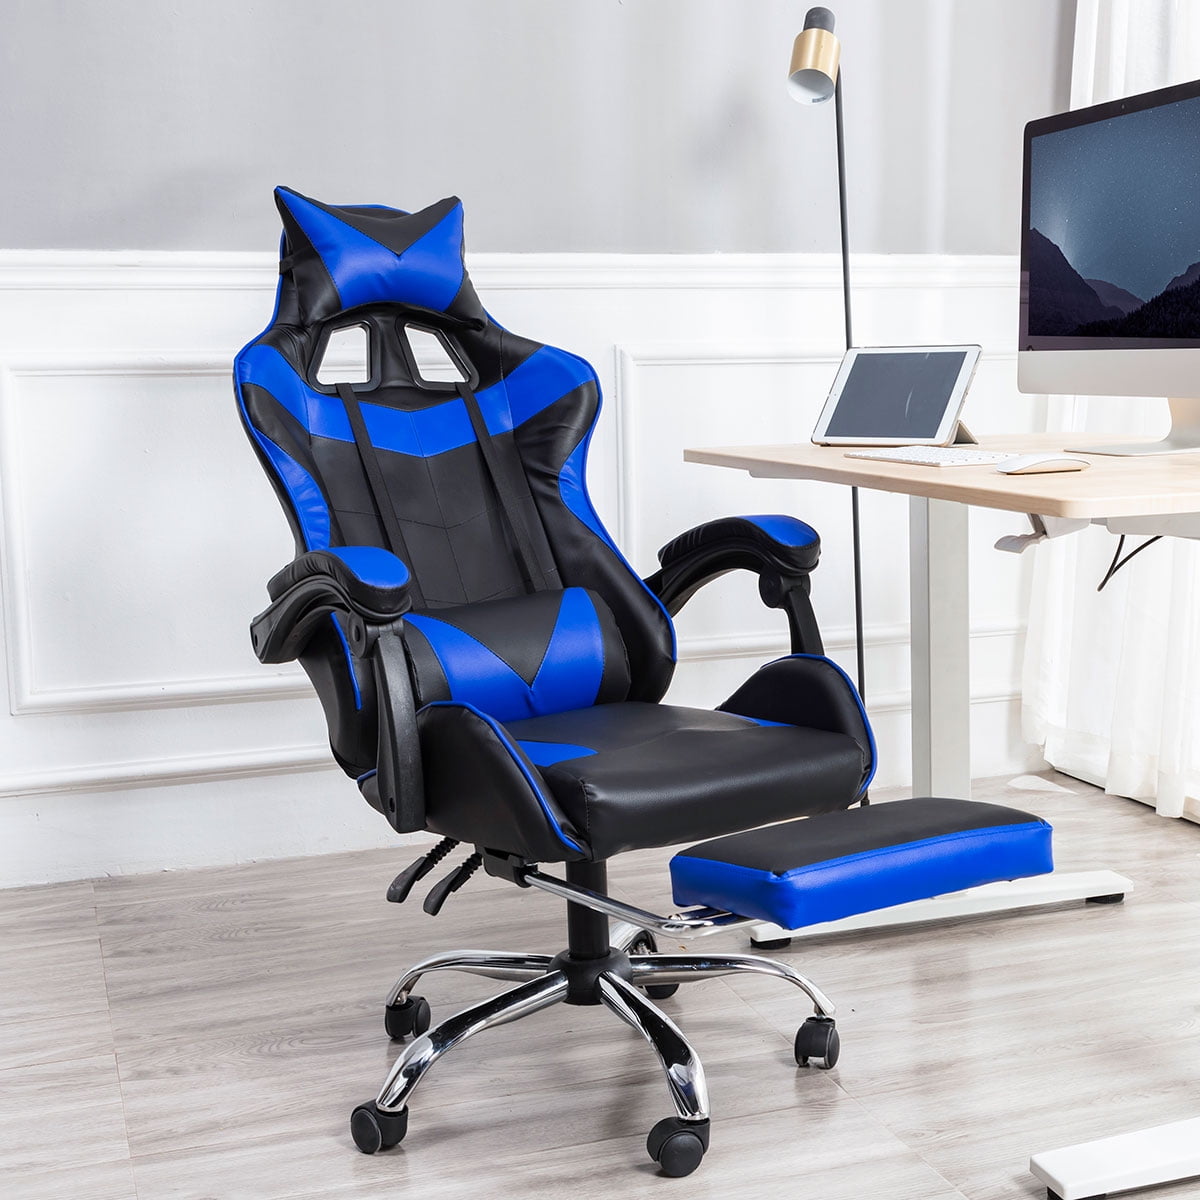 Cool Best Chairs For Office And Gaming in Bedroom